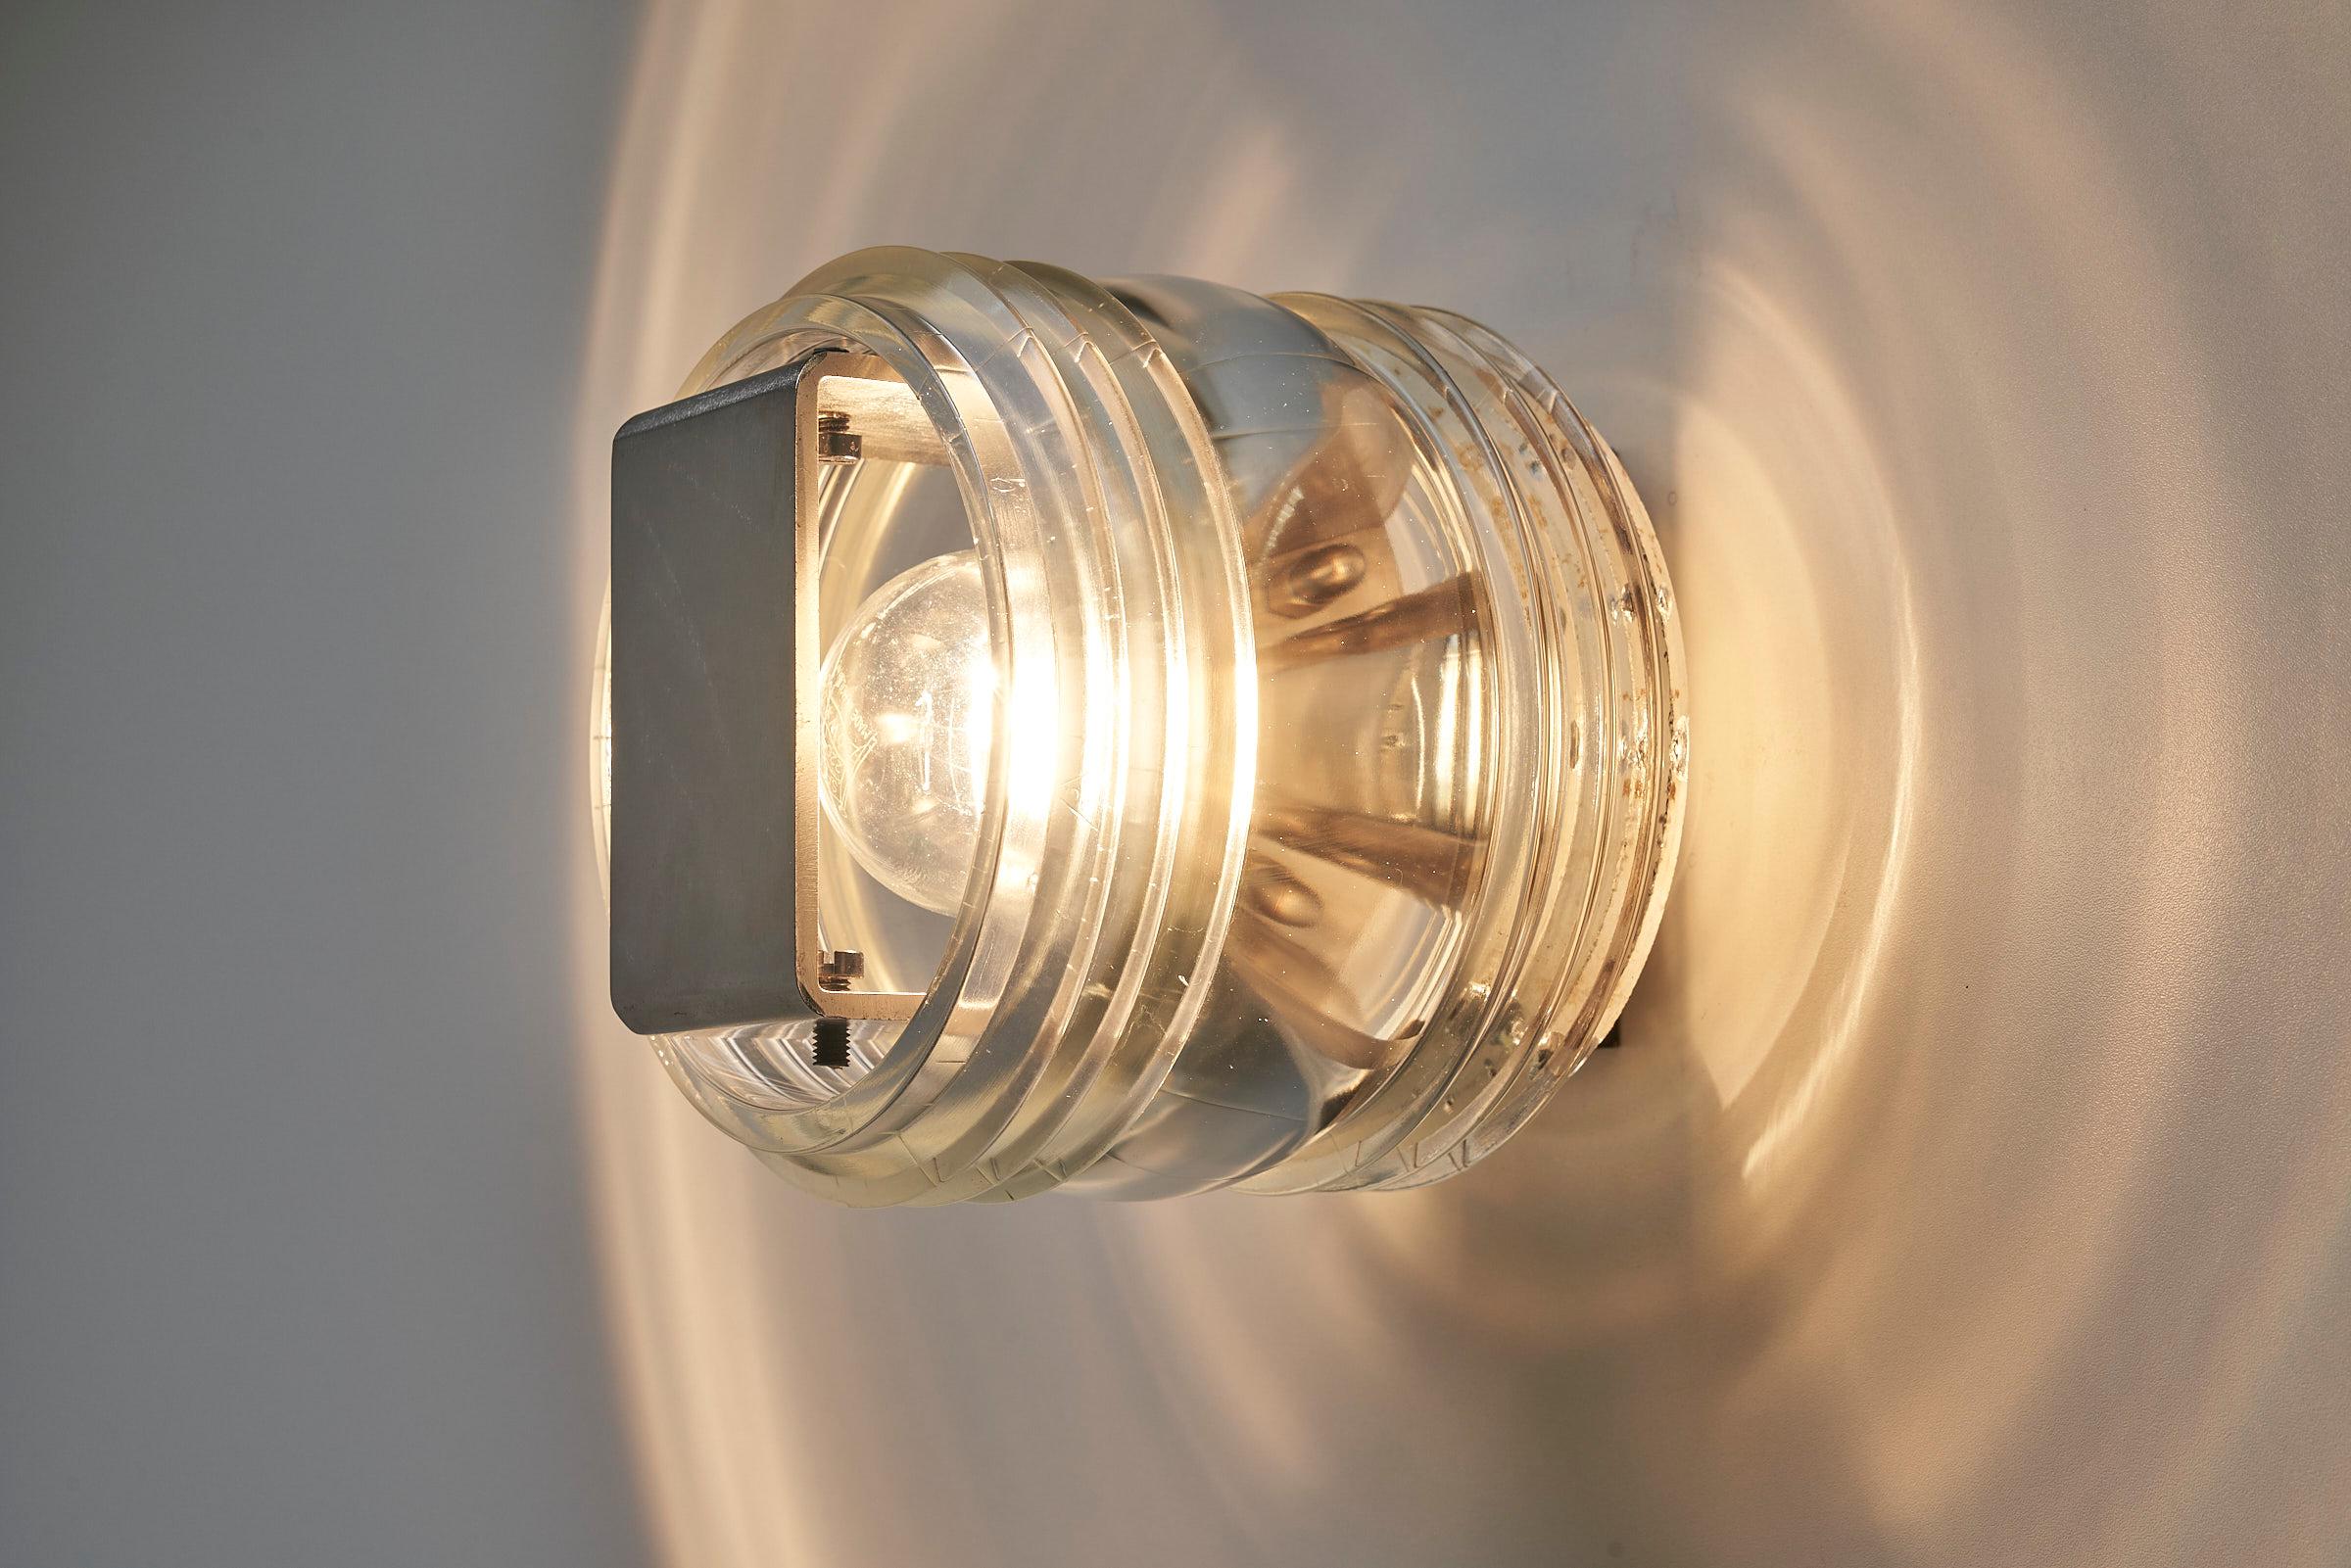 Mid-20th Century Thick Glass Diffuser Wall Lamp By Kontakt Werkstatten